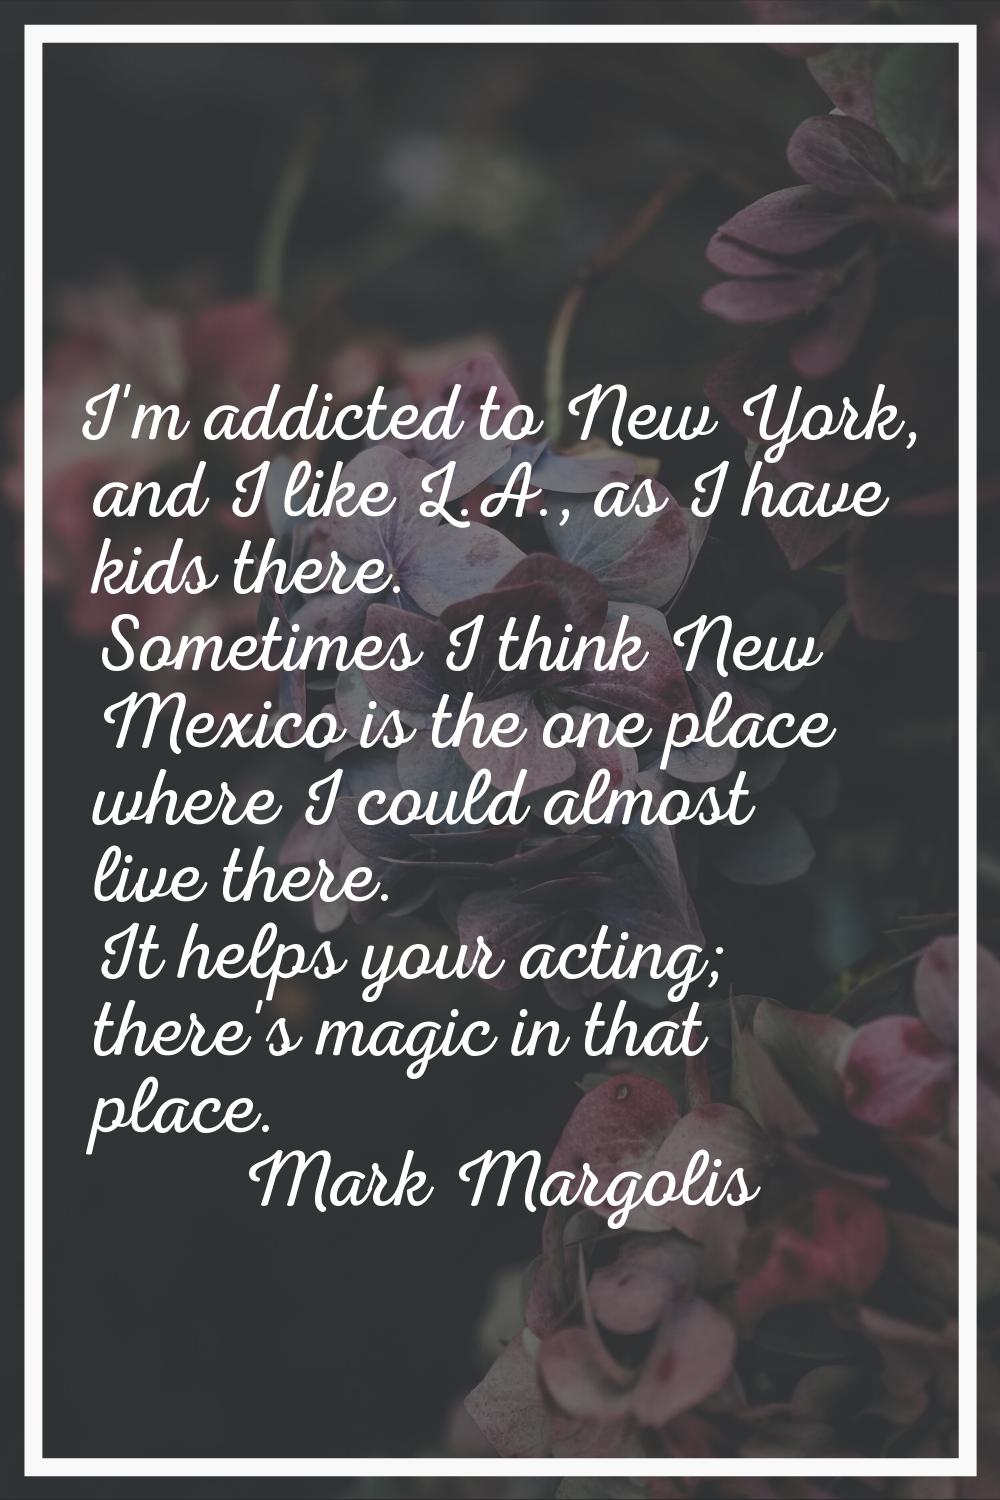 I'm addicted to New York, and I like L.A., as I have kids there. Sometimes I think New Mexico is th